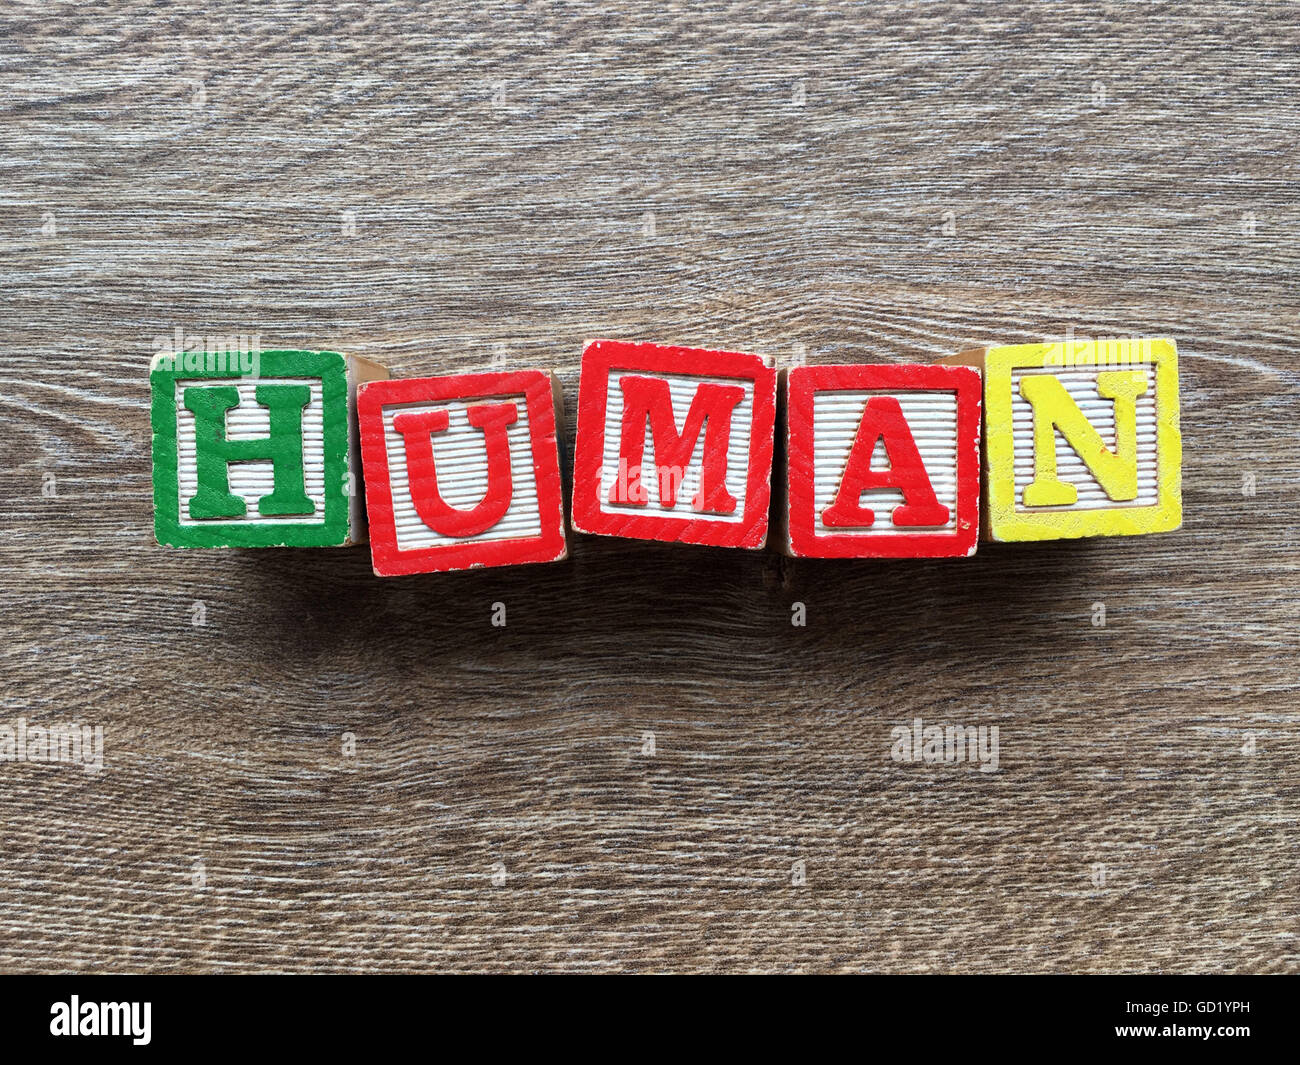 Human word written with wood block letter toys Stock Photo